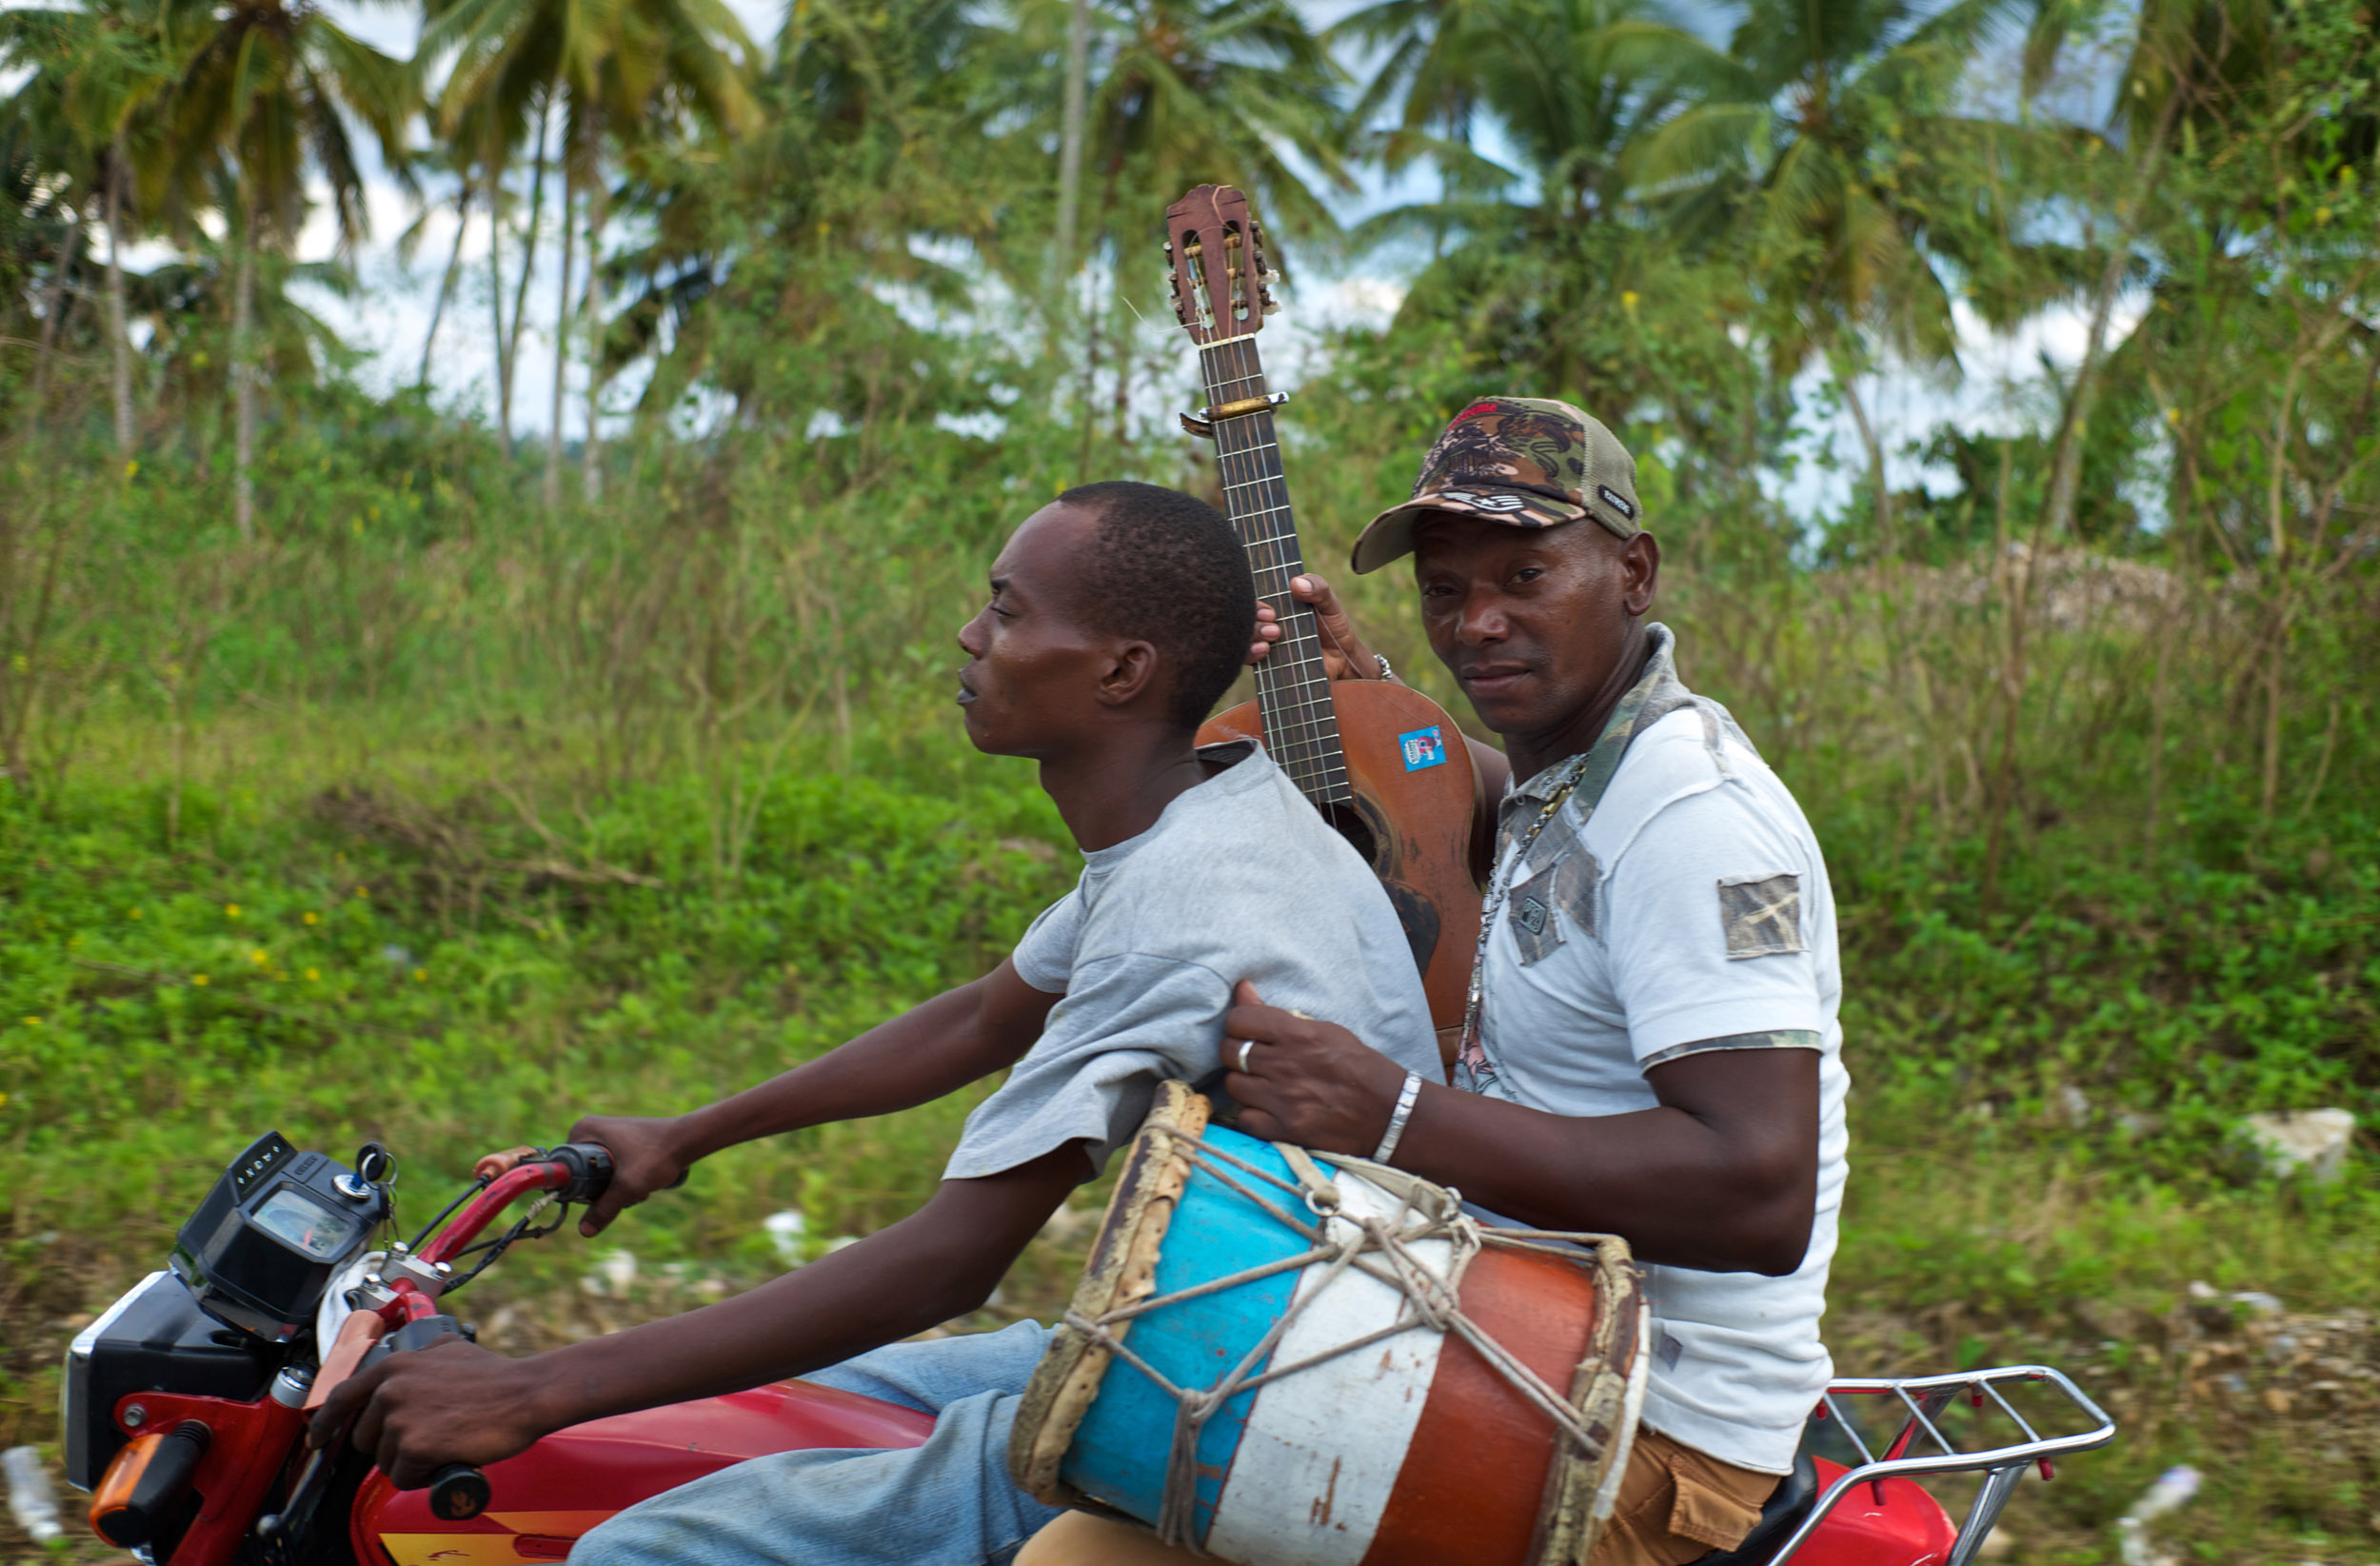 Motorcycling Musicians in the Dominican Republic